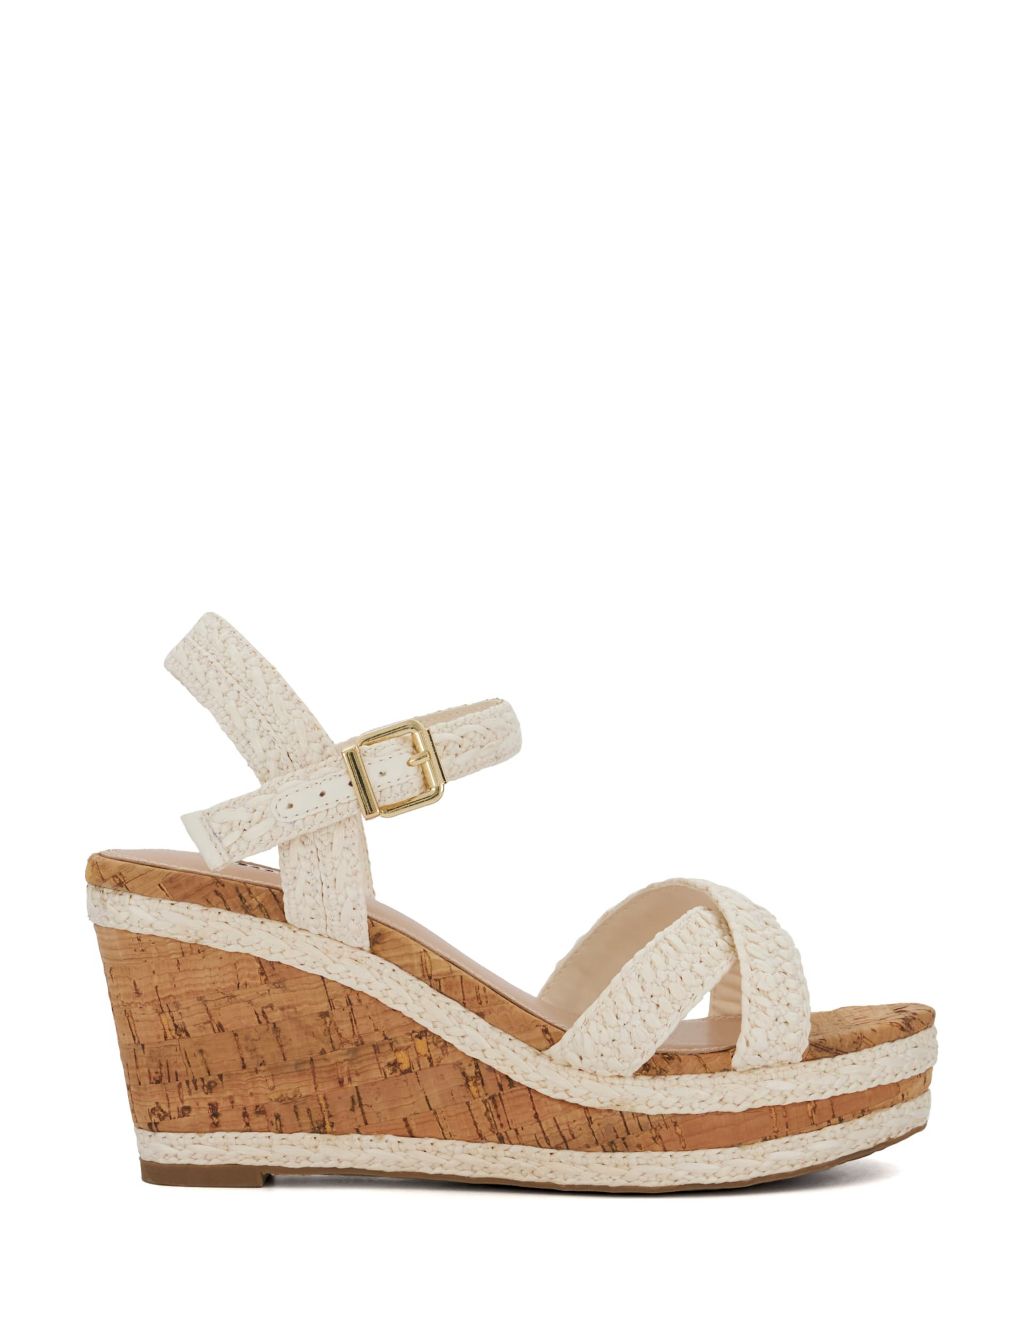 Wide Fit Woven Strappy Wedge Sandals